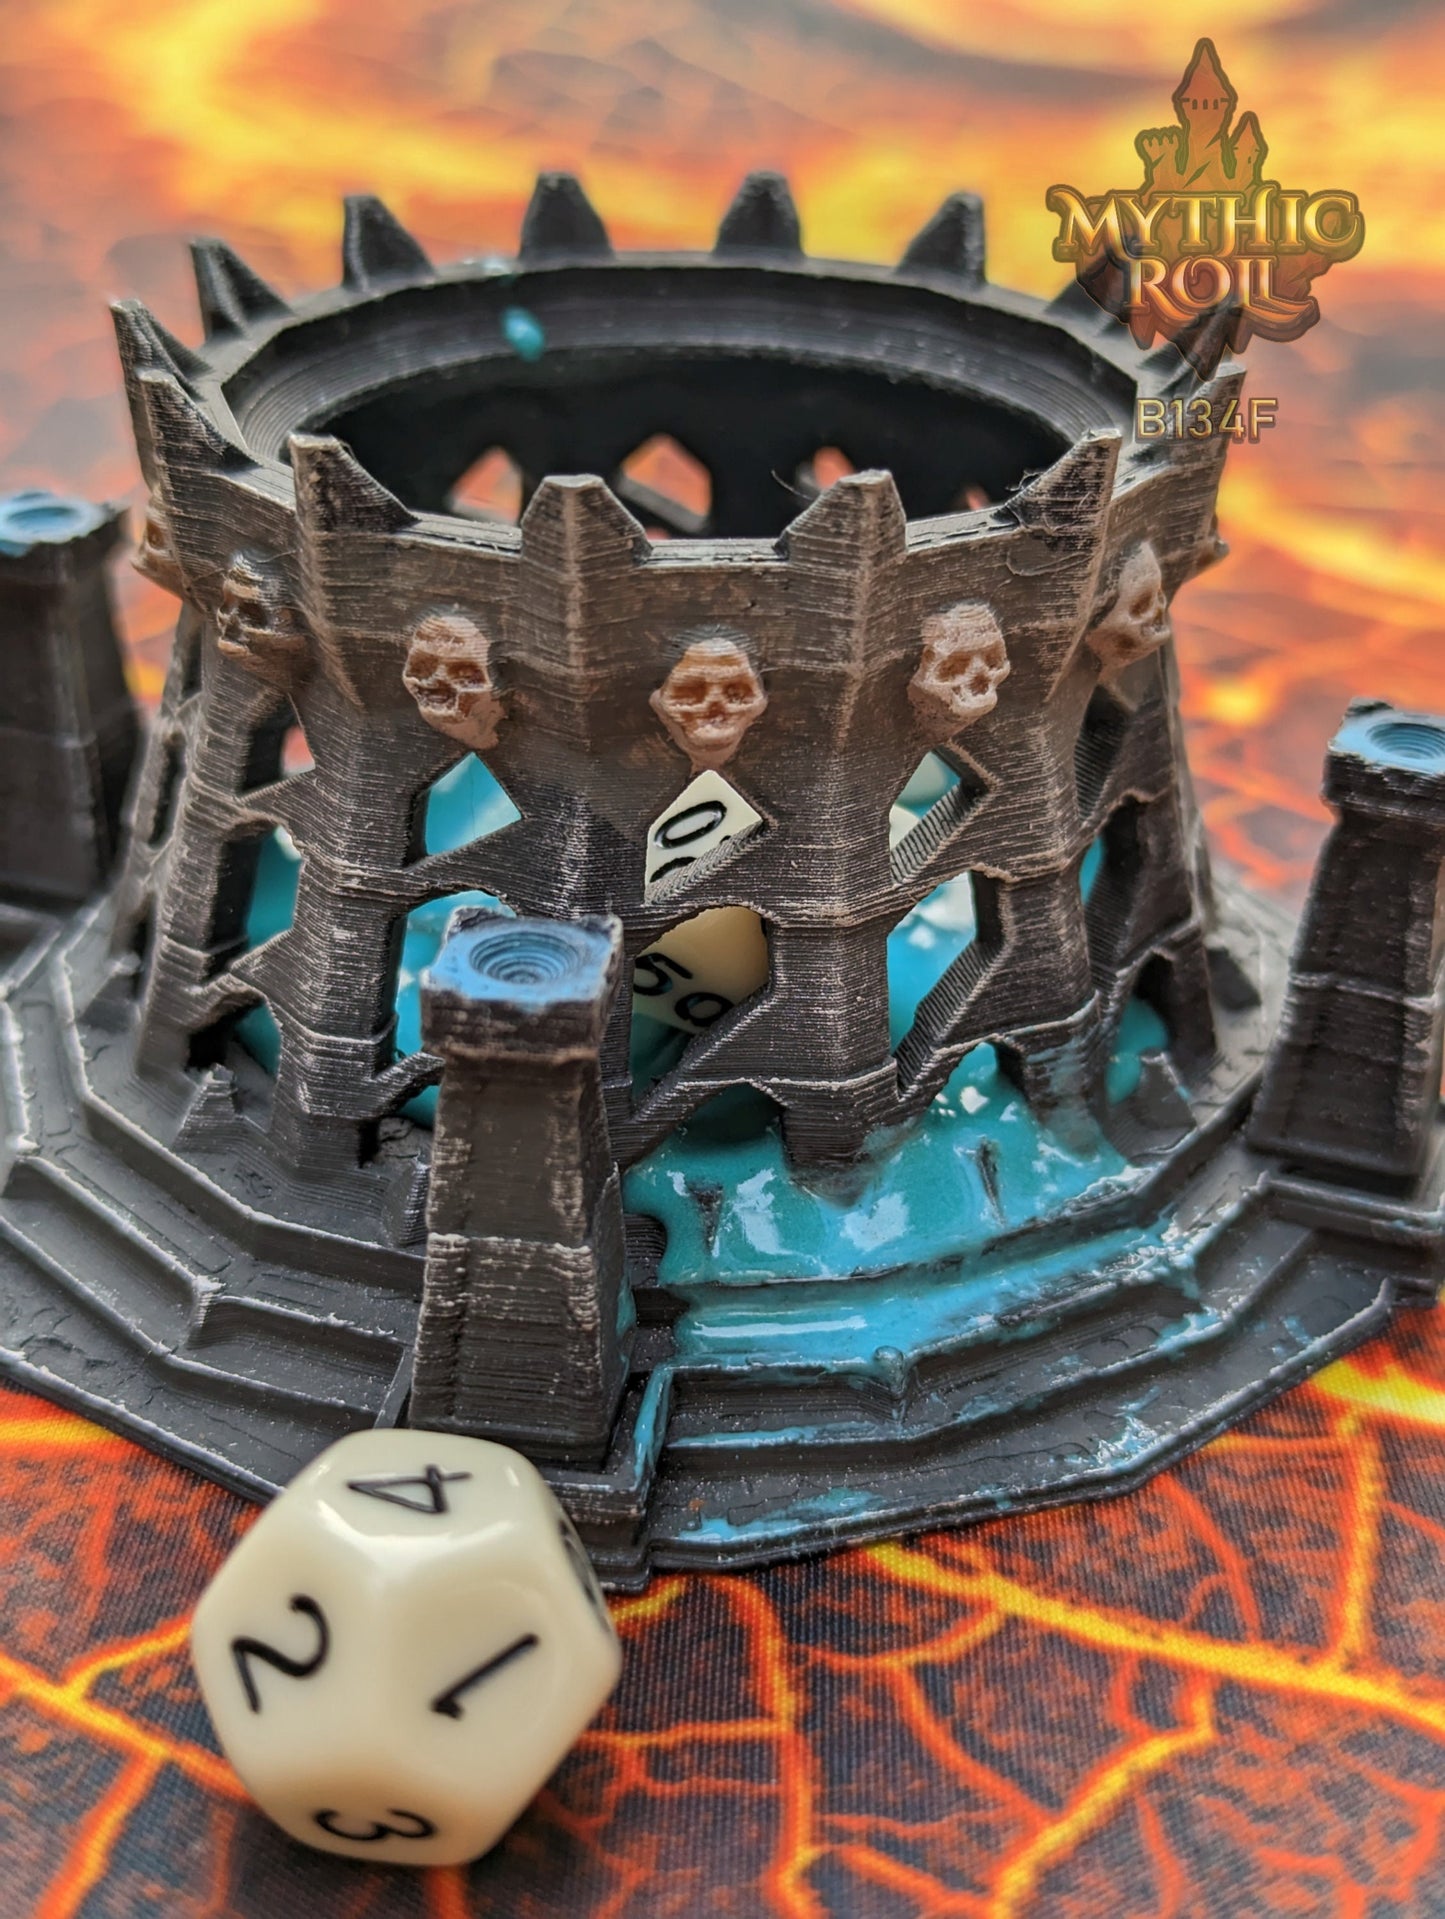 Necromancer's Mausoleum 3D Printed Dice Jail | RPG Dice Vault | D20 Storage Box | Dice Bag - Mythic Roll Collection by Unchained Games.